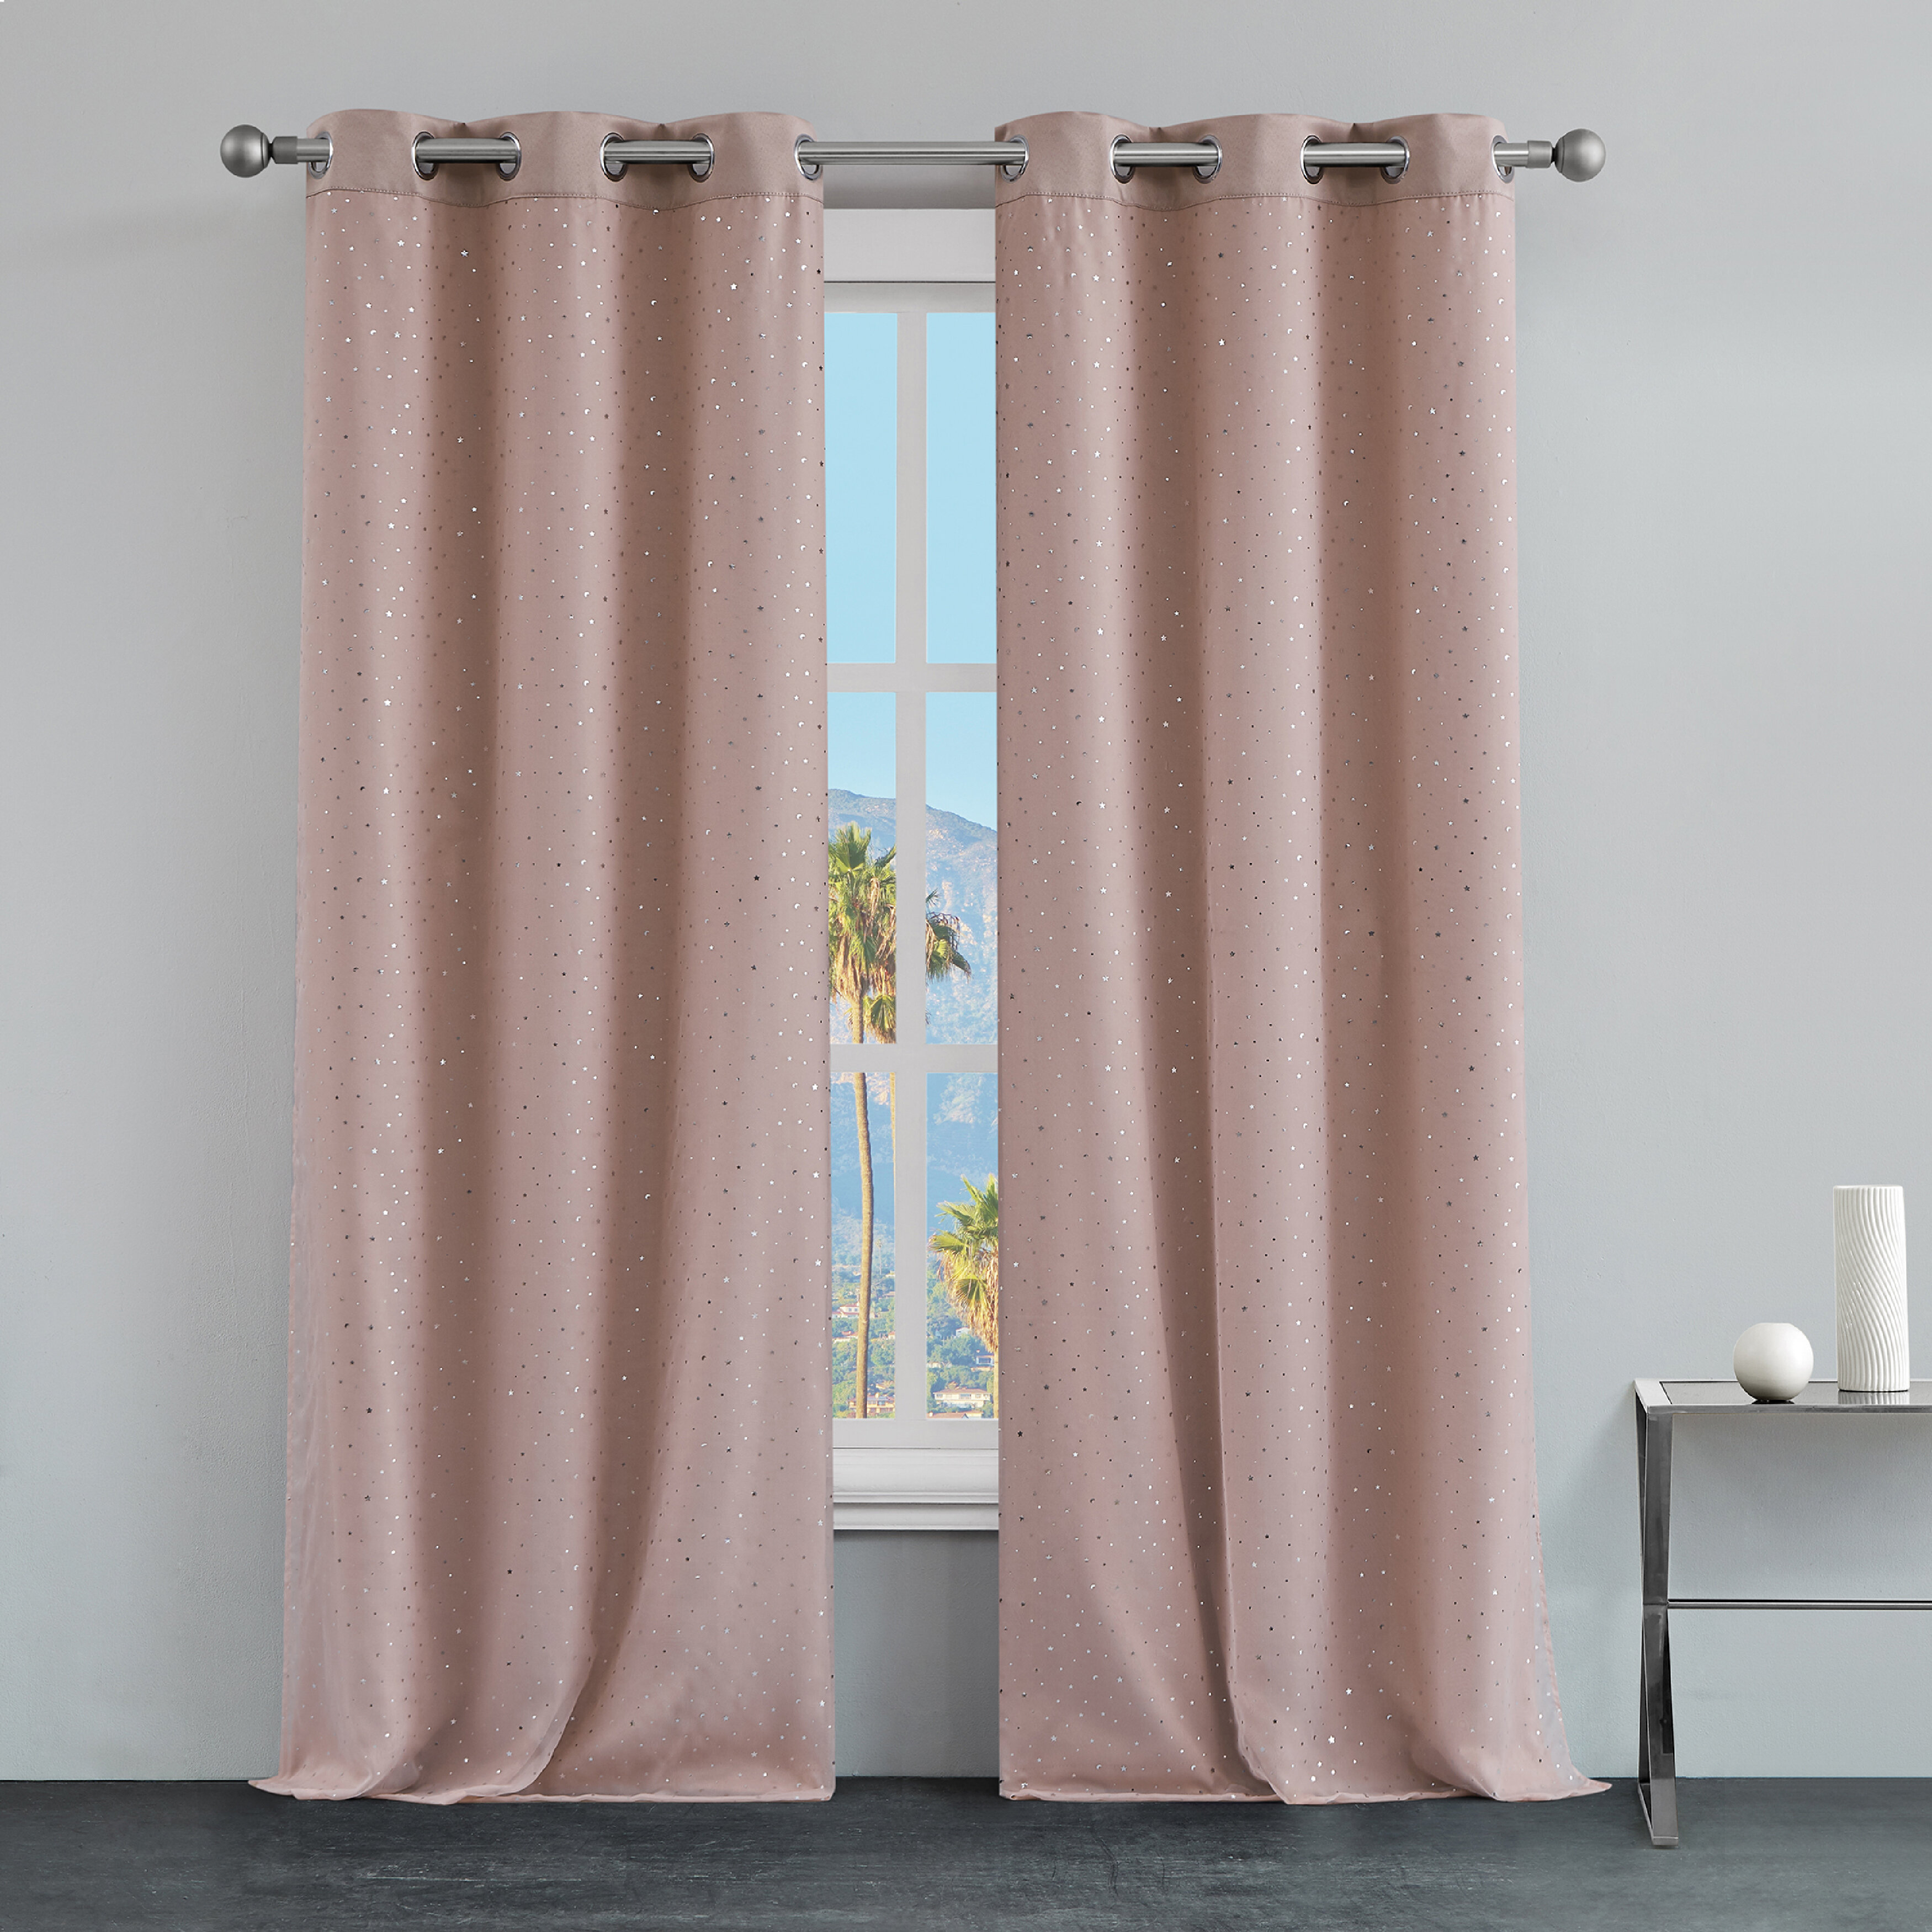 Melody Collection Embellished Room Darkening Curtains by Juicy Couture, Curtain Panel Pair - Blush - 96 Inches